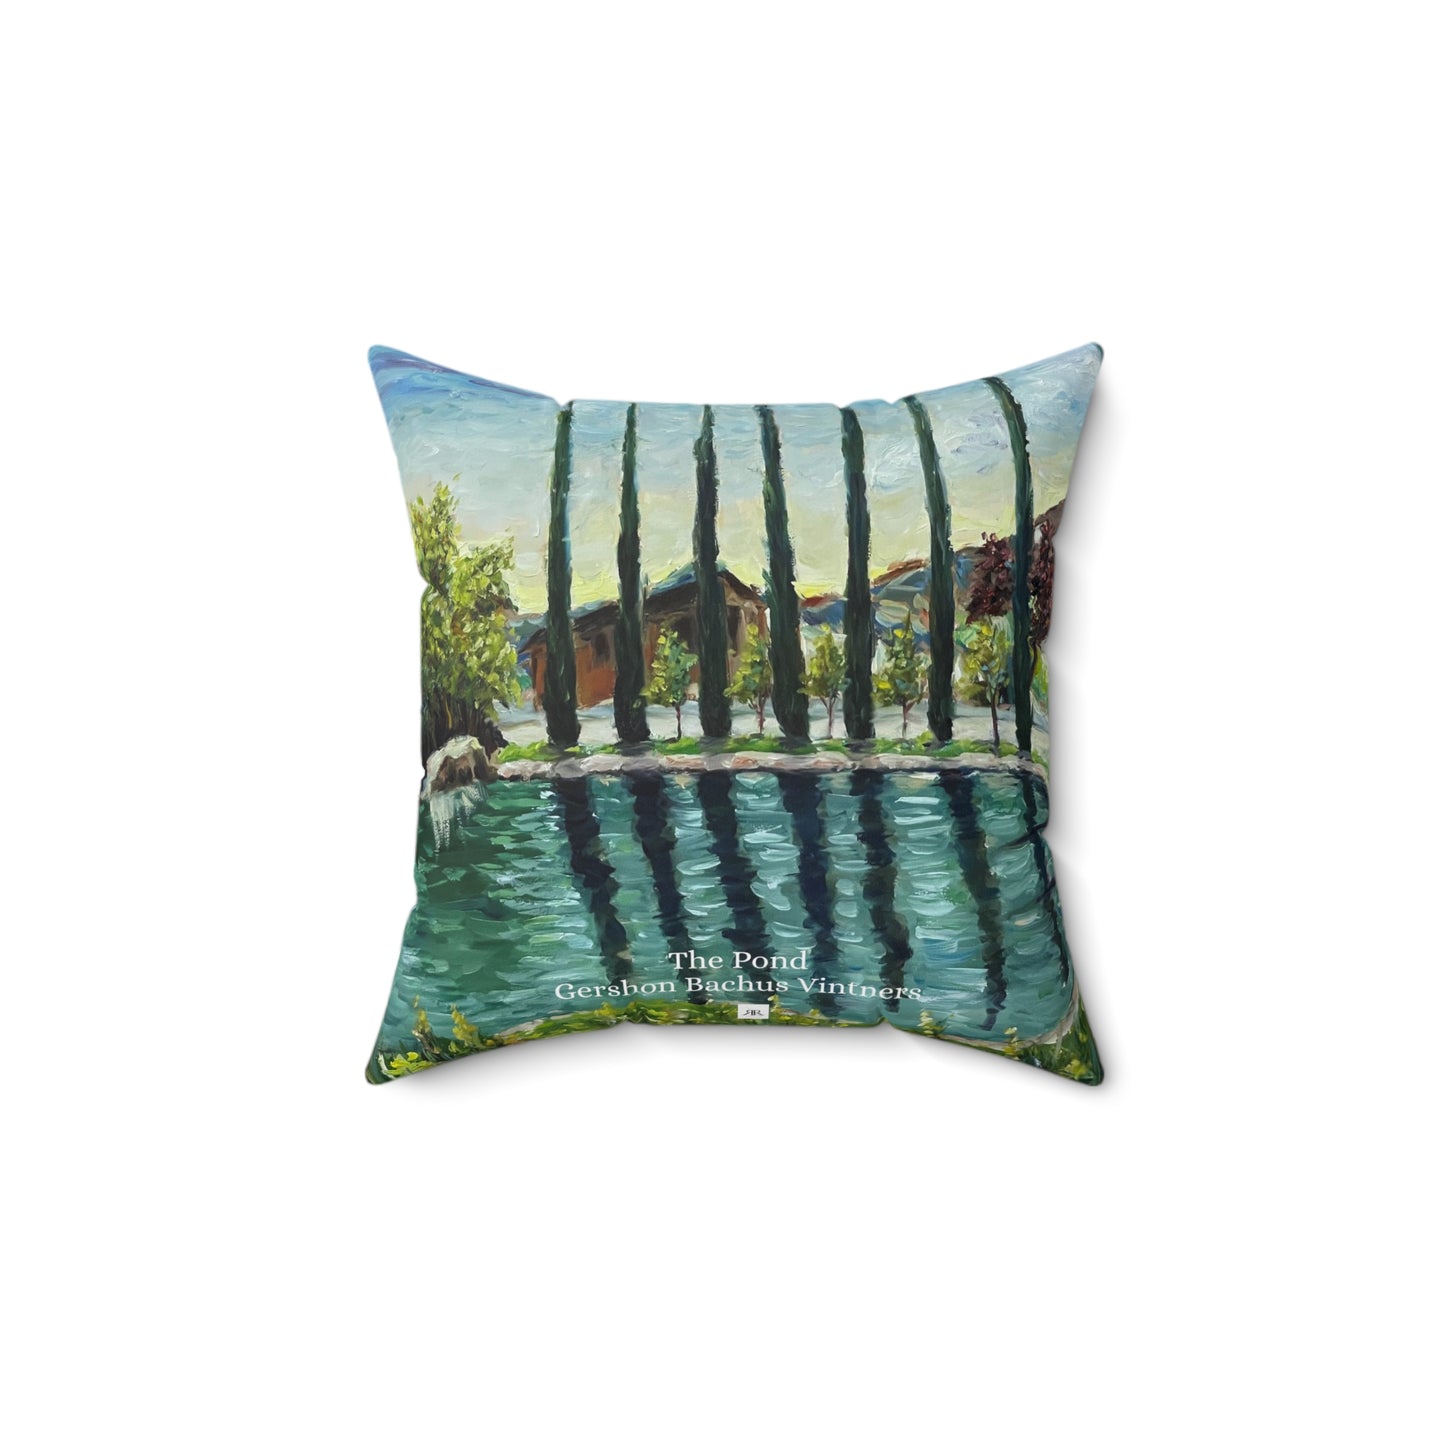 The Pond at Gershon Bachus Vintners GBV  Indoor Spun Polyester Square Pillow